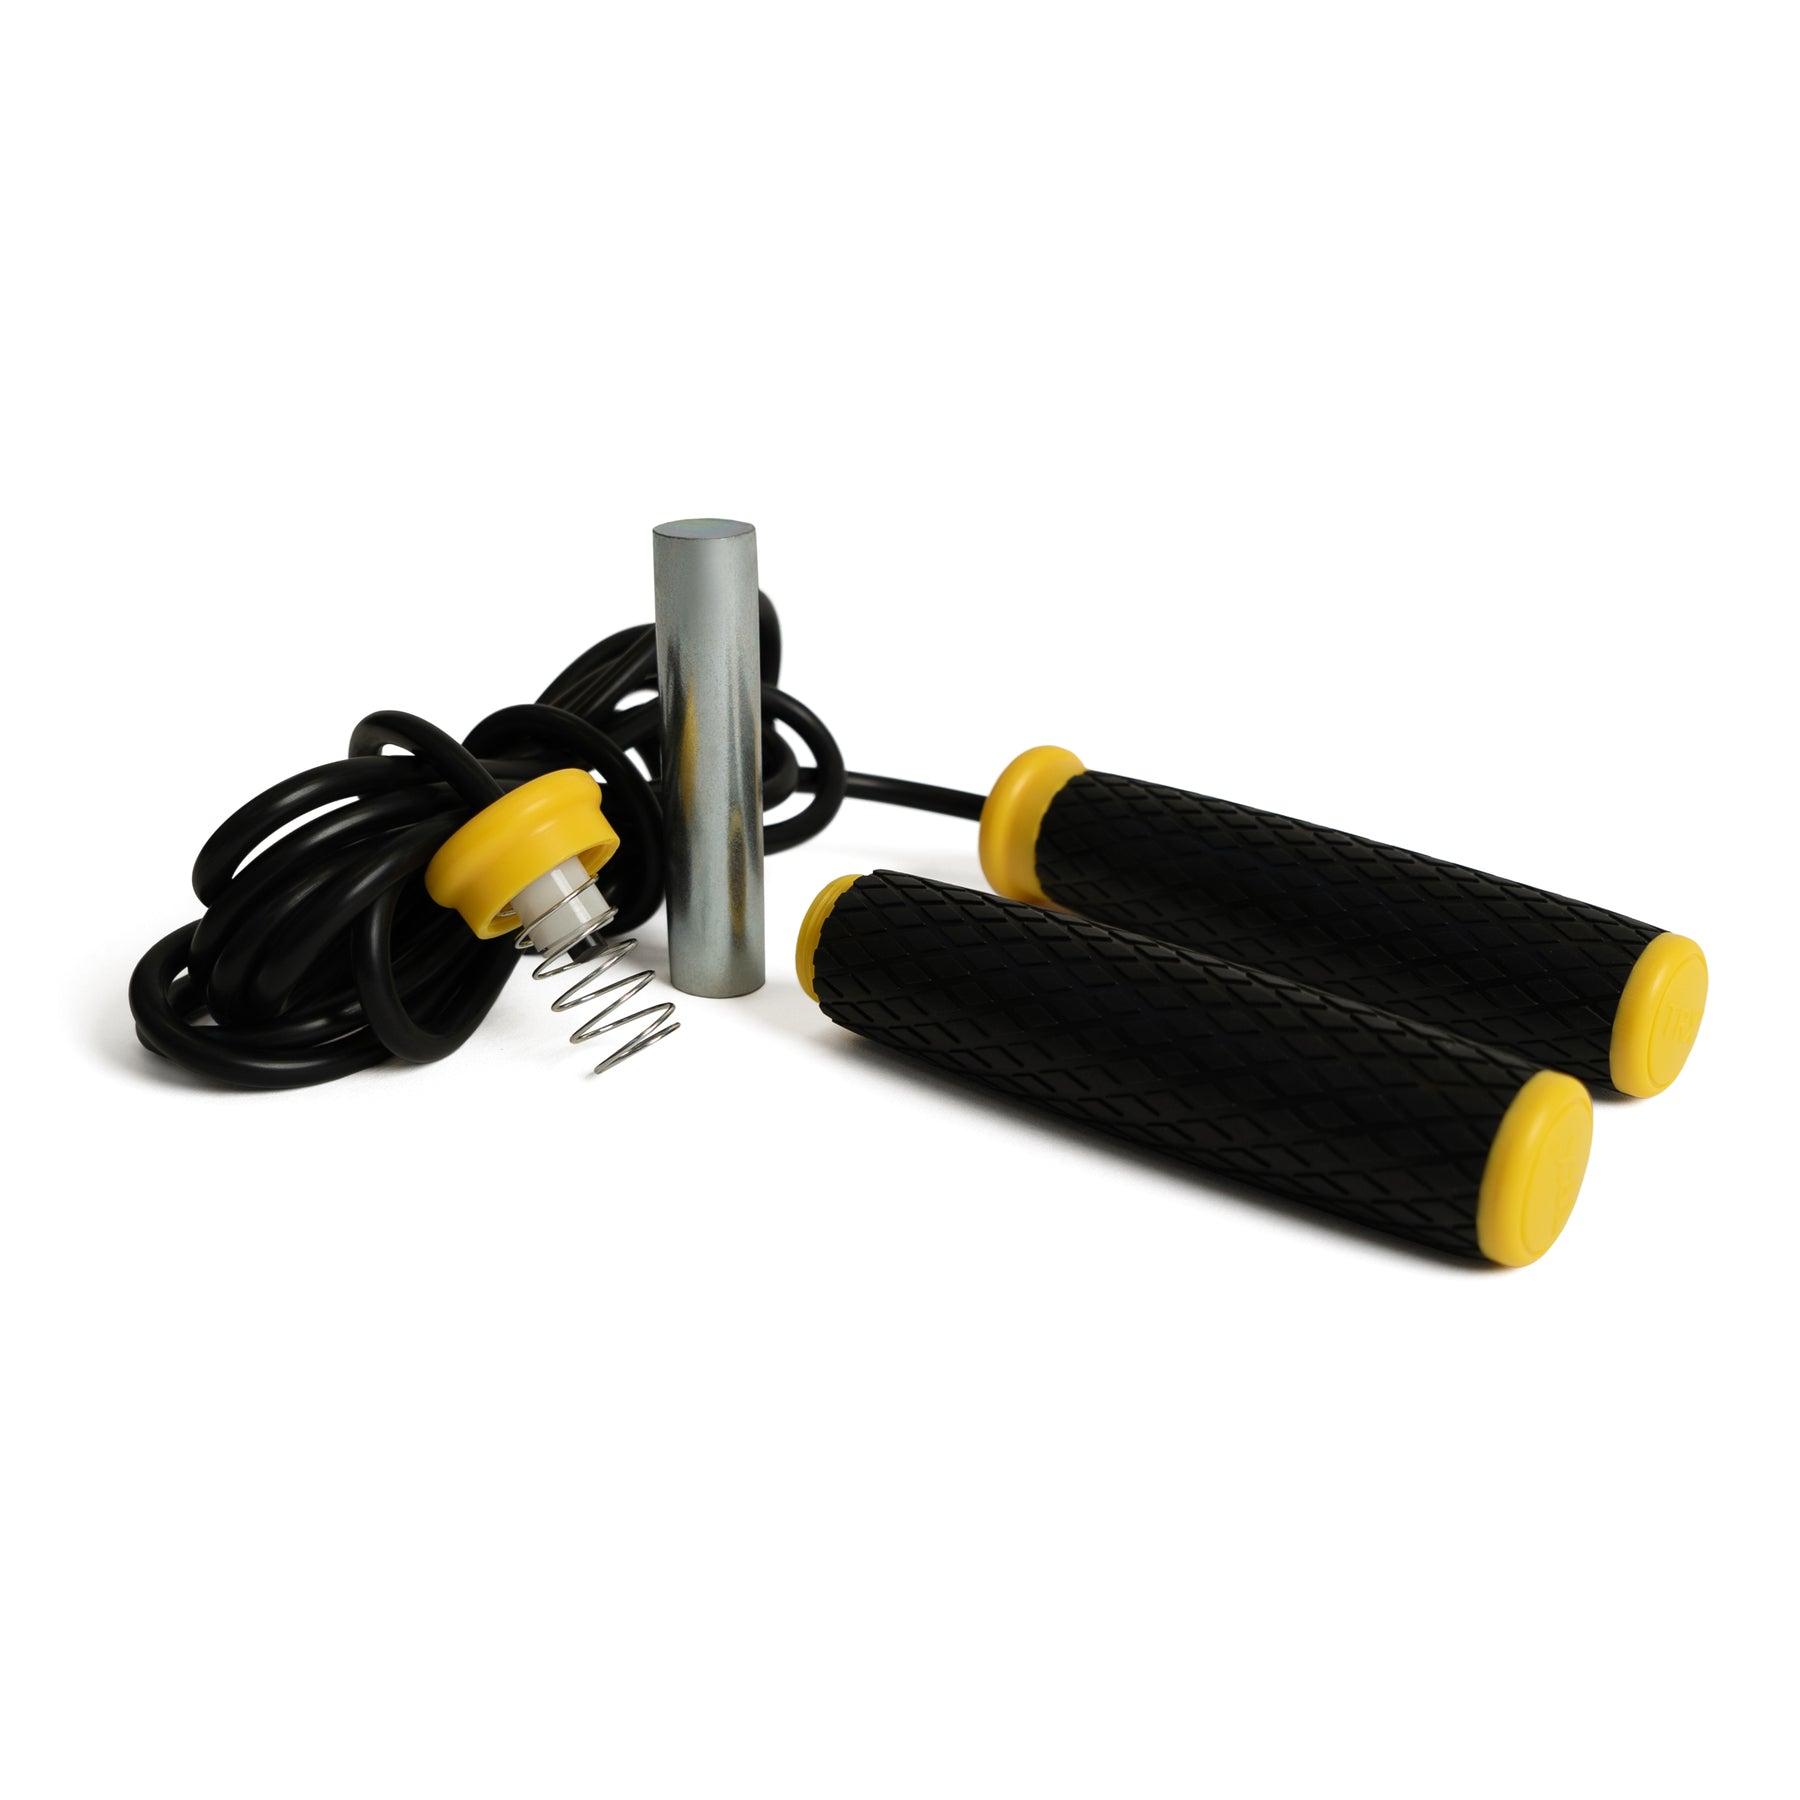 TRX WEIGHTED JUMP ROPE